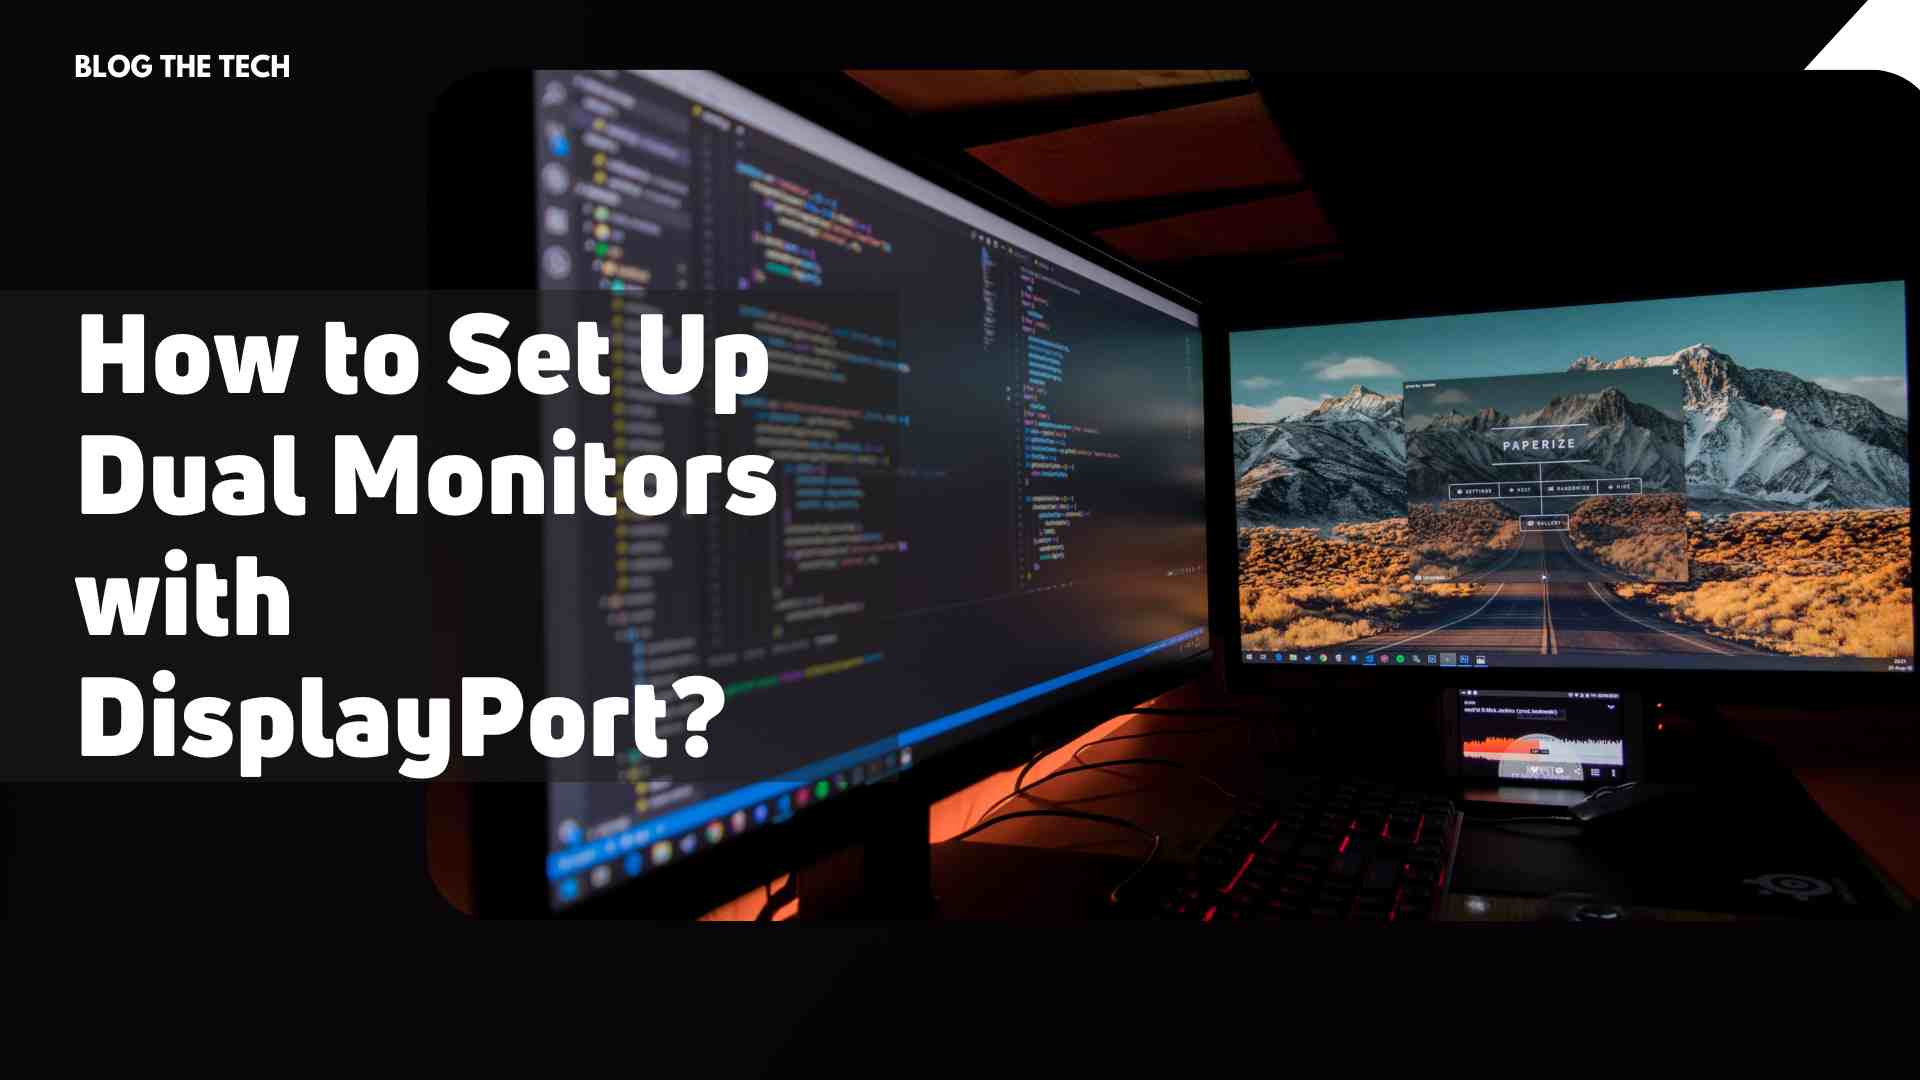 How to Set Up Dual Monitors with DisplayPort?